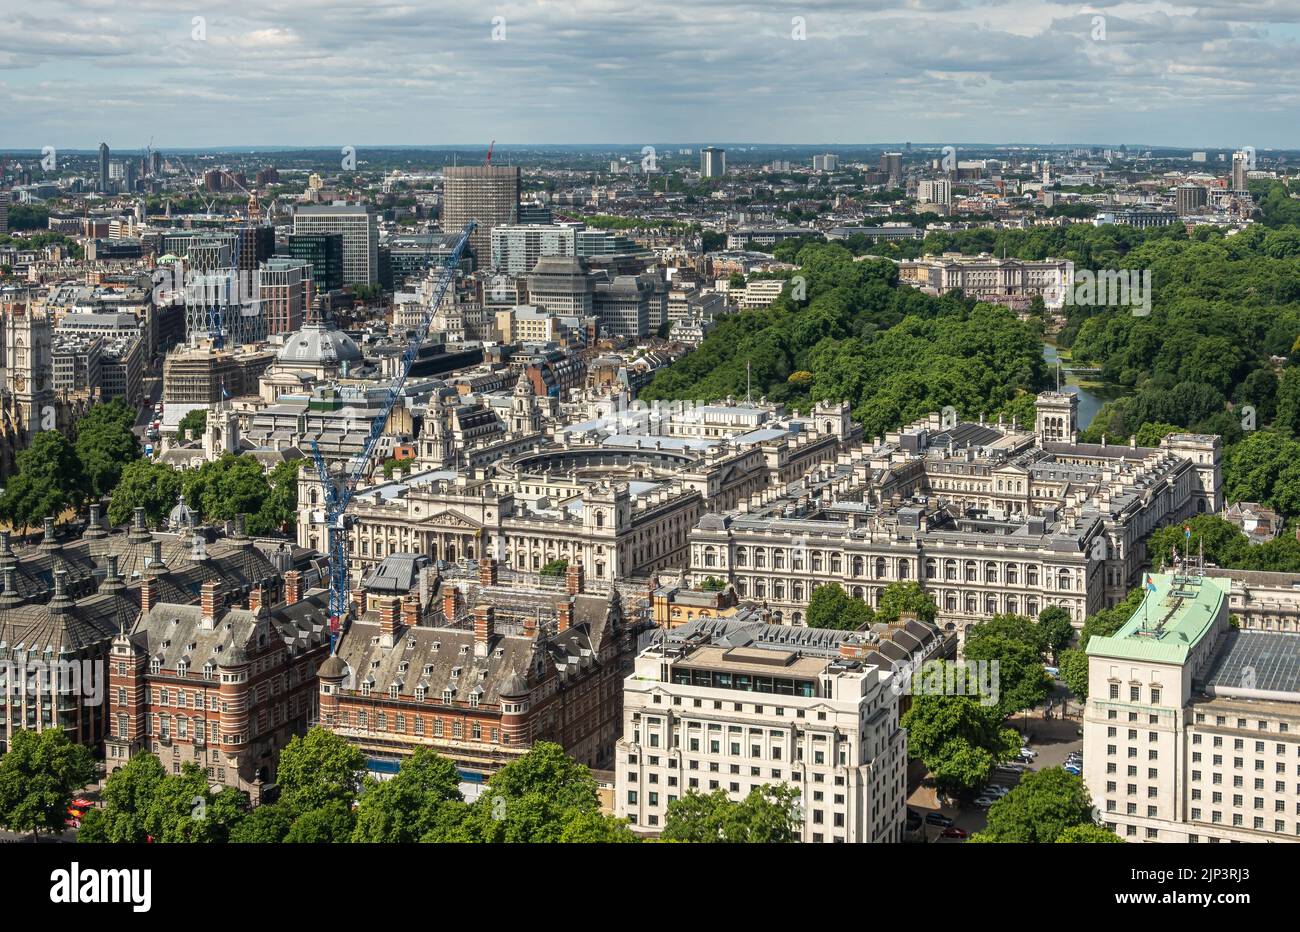 London, UK - July 4, 2022: Seen from London Eye. Imperial War Museum square buildings with green St. James's park behind set in dense urban jungle cit Stock Photo